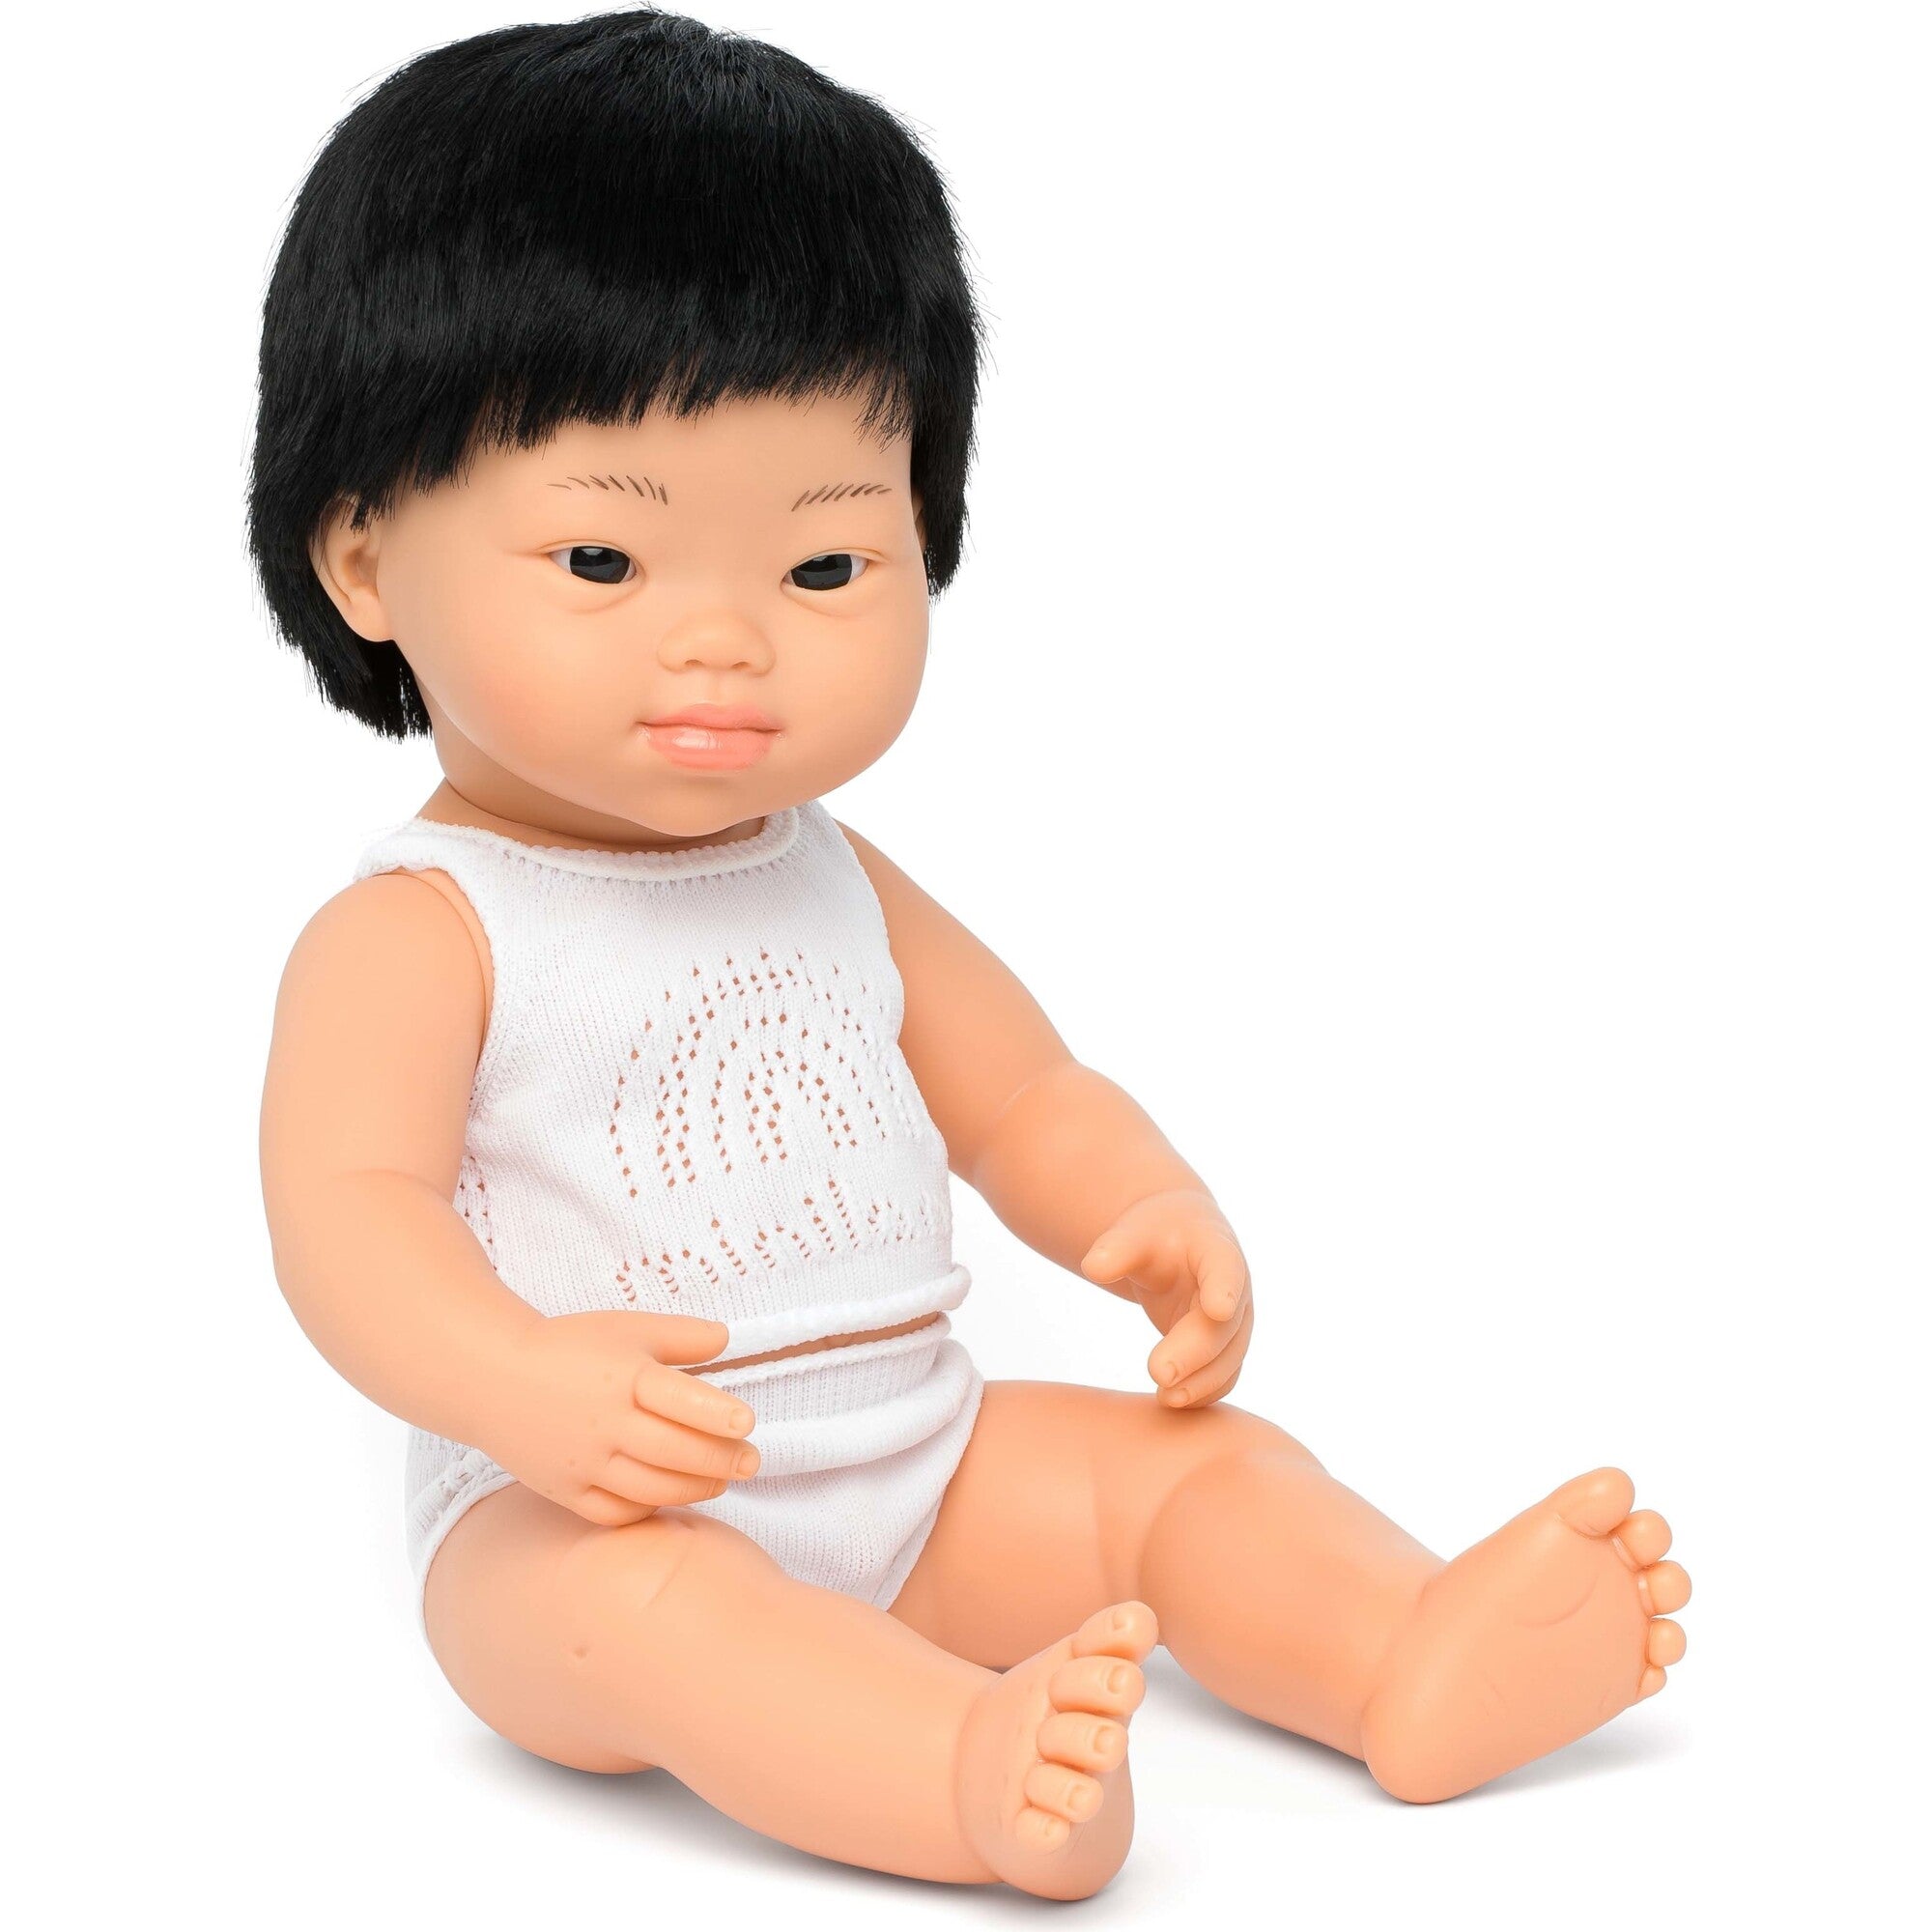 Miniland Baby Doll Asian Boy with Down Syndrome 15" Dolls